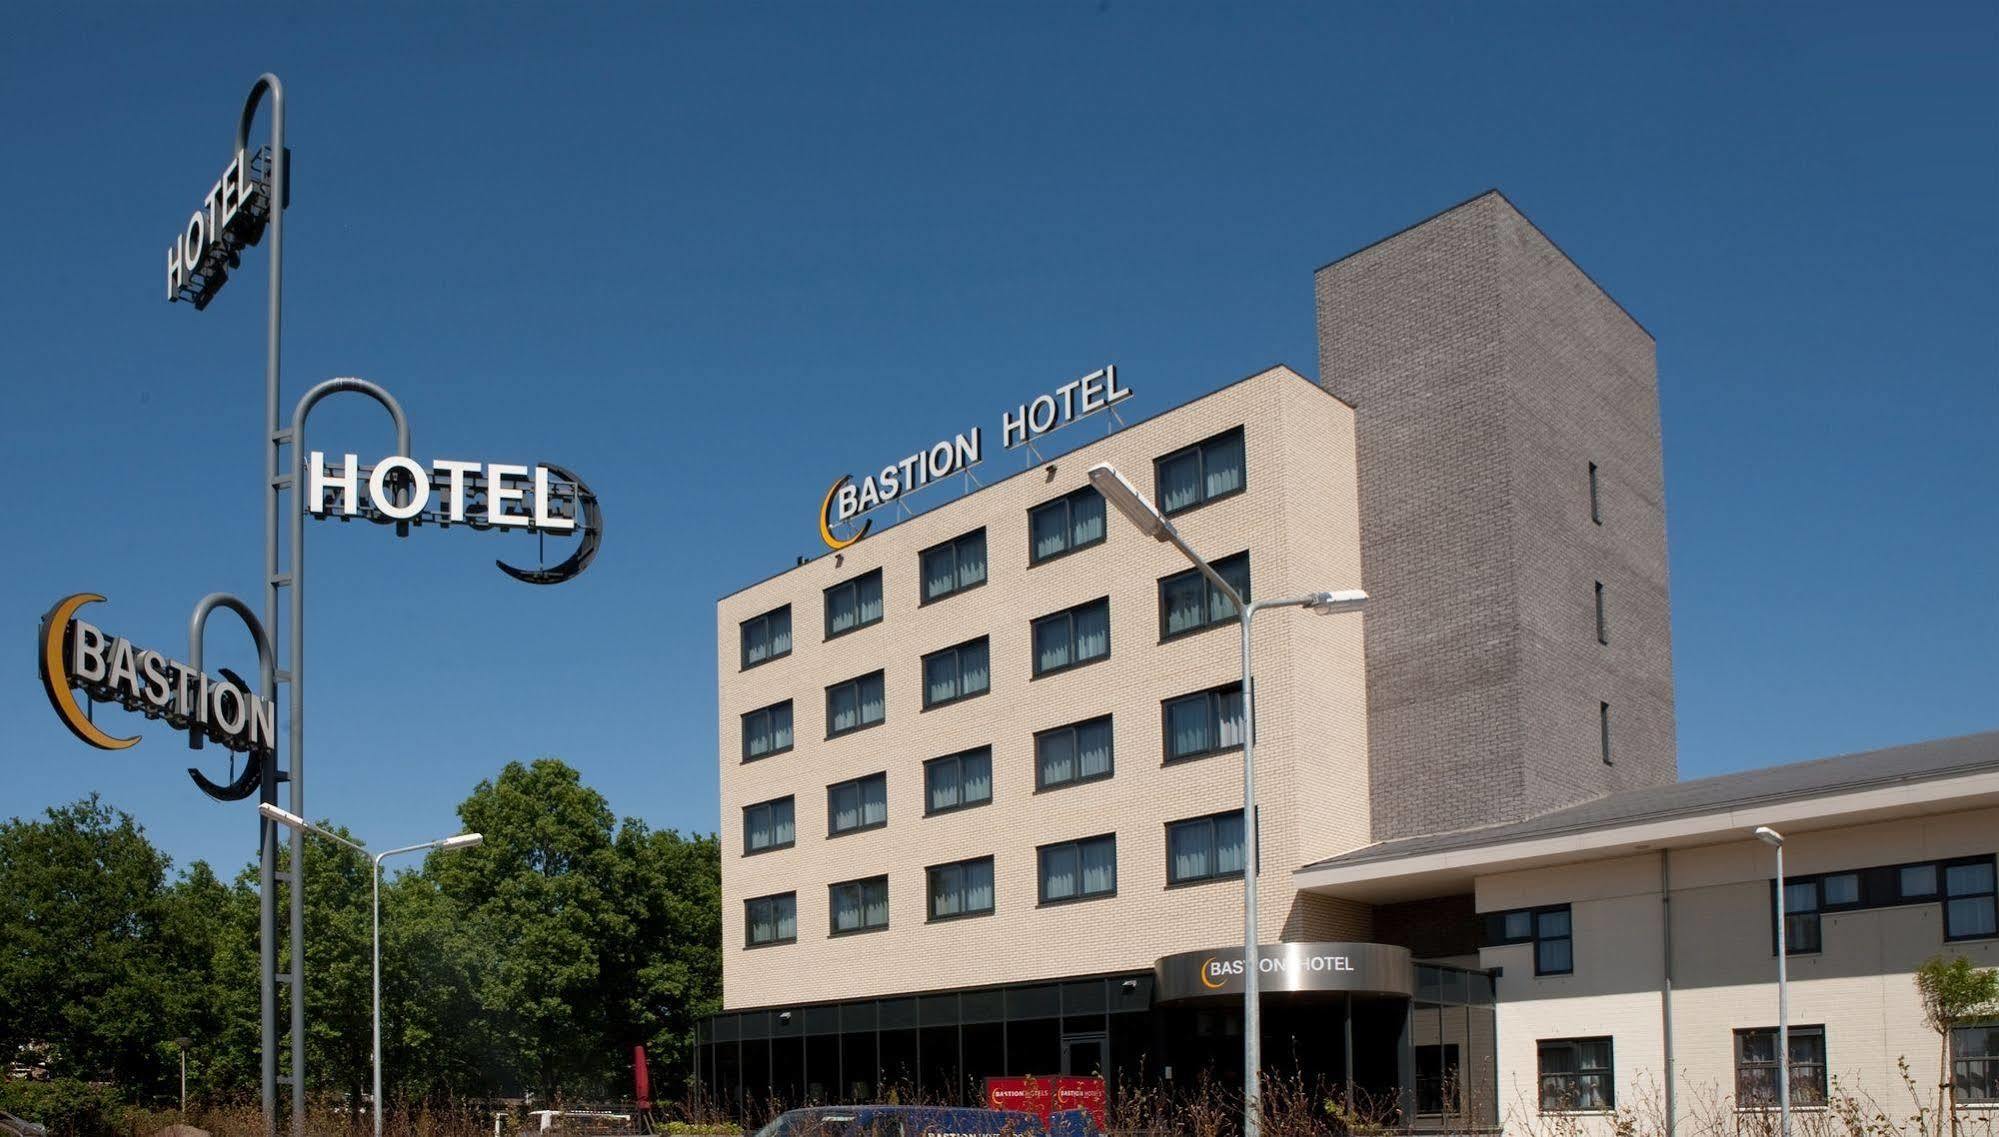 Bastion Hotel Roosendaal Exterior photo